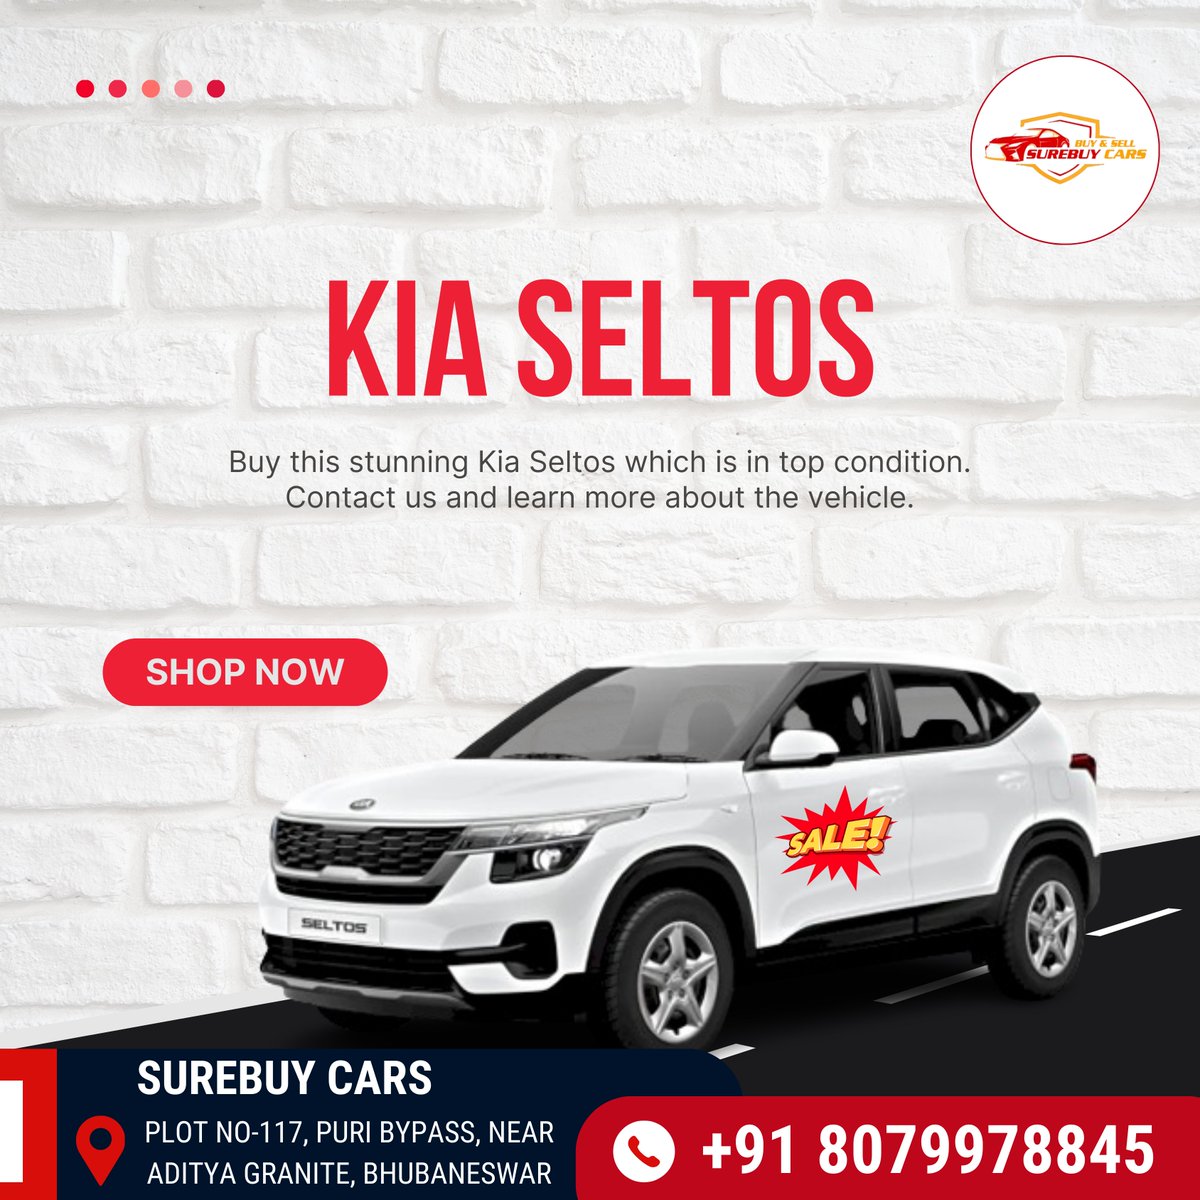 Buy This Stunning Kia Seltos Which Is In Top Condition.

Call For More: 7656838313, 8079978845

: Plot No-117, Puri Bypass, Bhubaneswar

#SurebuyGroup #SurebuyCars #UsedCar #SecondHandCar #PreOwnedCar #CarFinance #Loan #CarLoan #AffordableRide #Bhubaneswar #Odisha #Feed